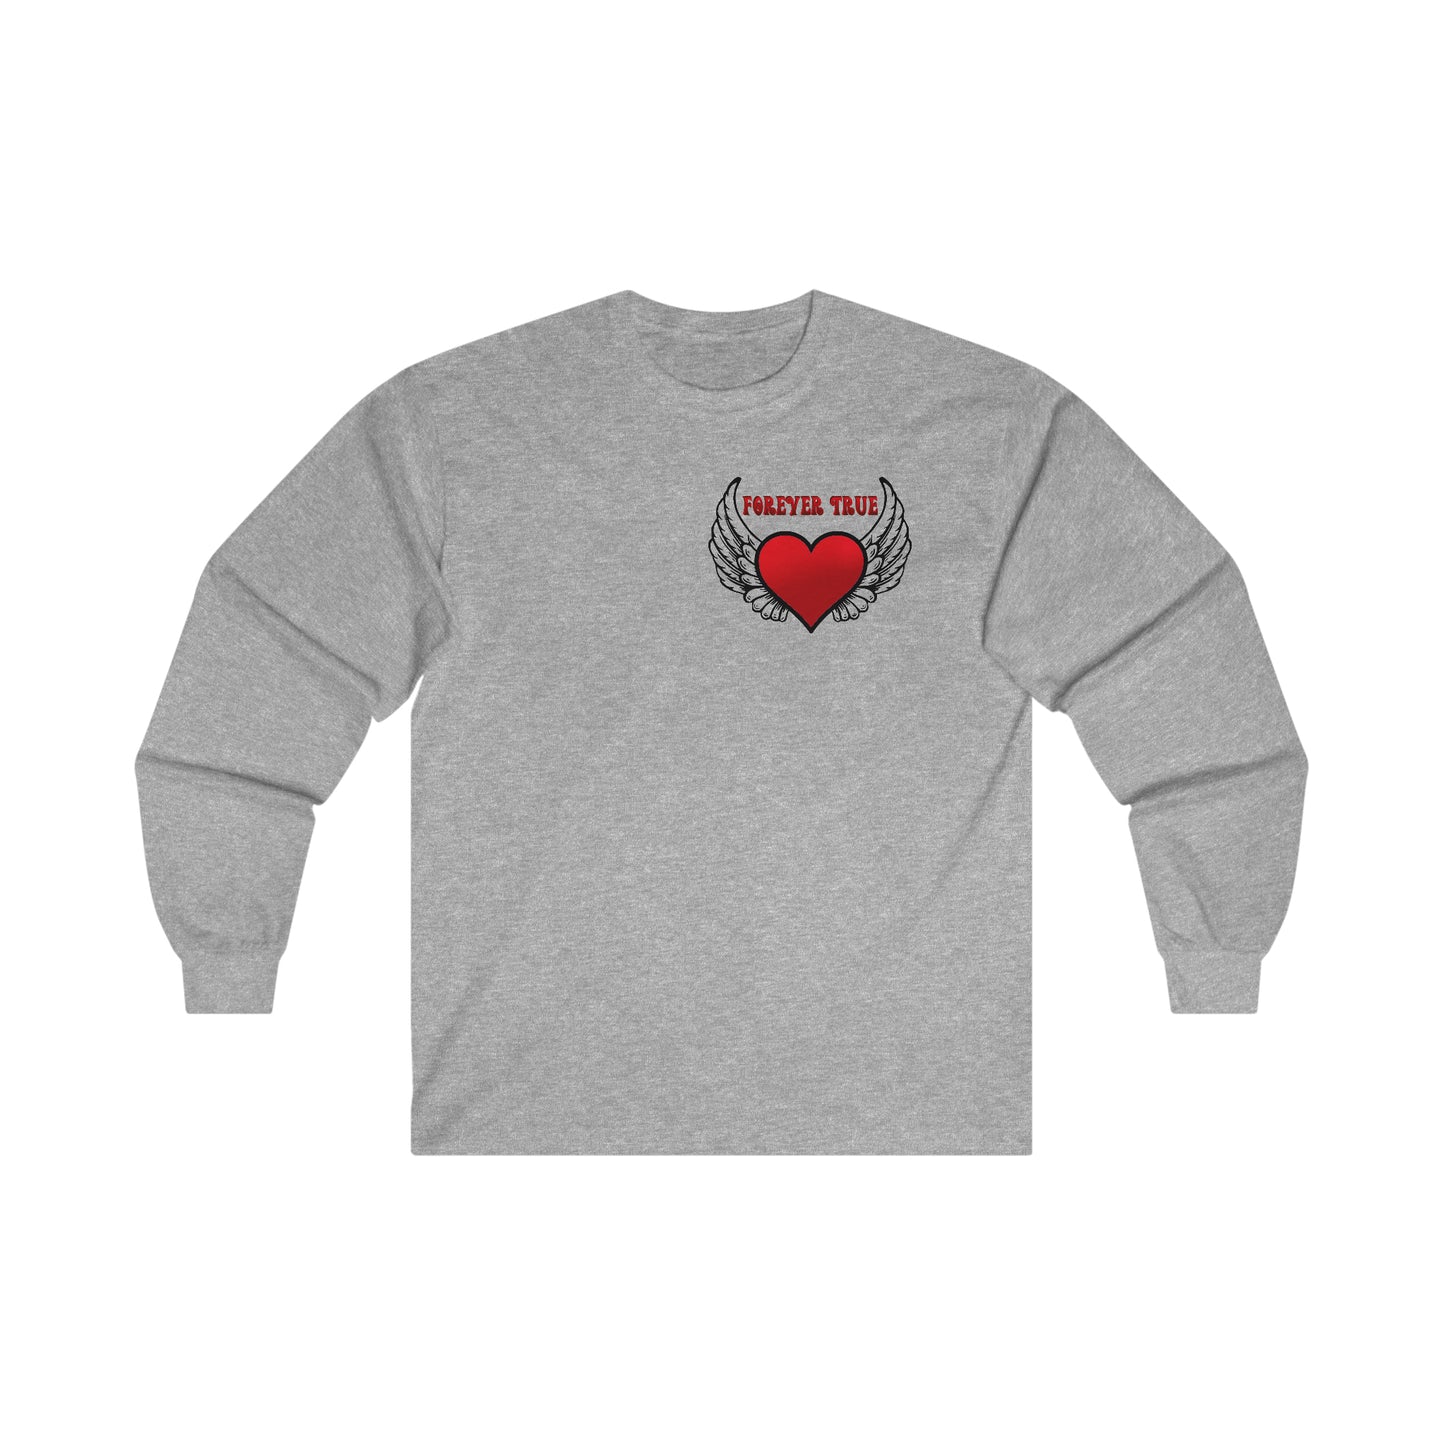 Valentines Heart Wings shirt / Mens valentines day shirt Long Sleeve / Cute Valentines day shirt / mens valentine / Valentines shirt